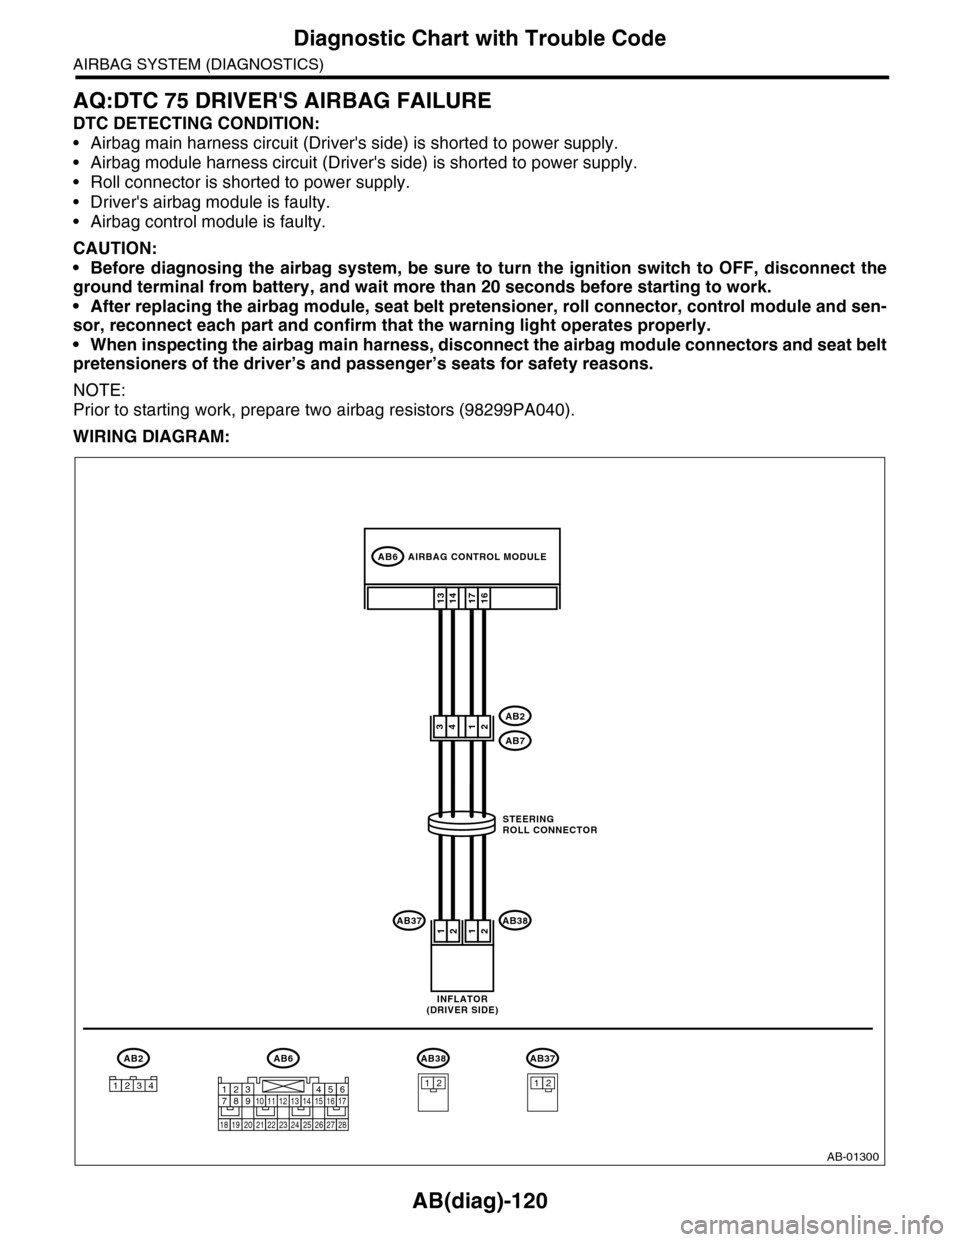 SUBARU TRIBECA 2009 1.G Service Service Manual AB(diag)-120
Diagnostic Chart with Trouble Code
AIRBAG SYSTEM (DIAGNOSTICS)
AQ:DTC 75 DRIVERS AIRBAG FAILURE
DTC DETECTING CONDITION:
•Airbag main harness circuit (Drivers side) is shorted to powe